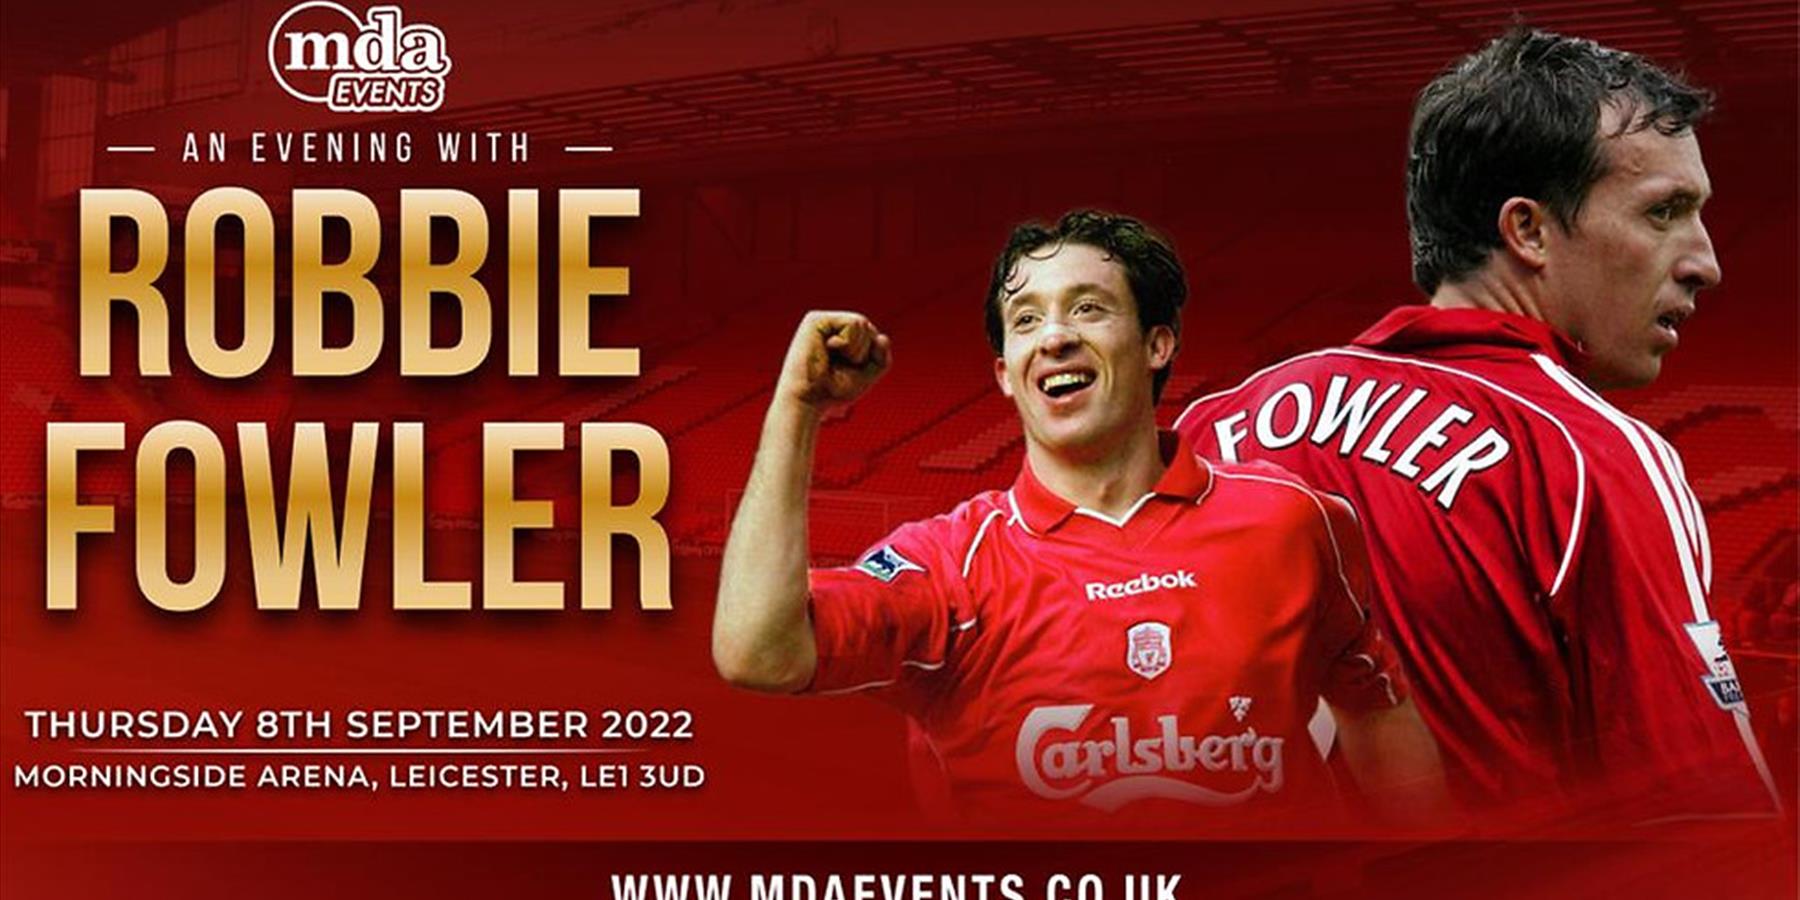 An evening with Robbie Fowler poster